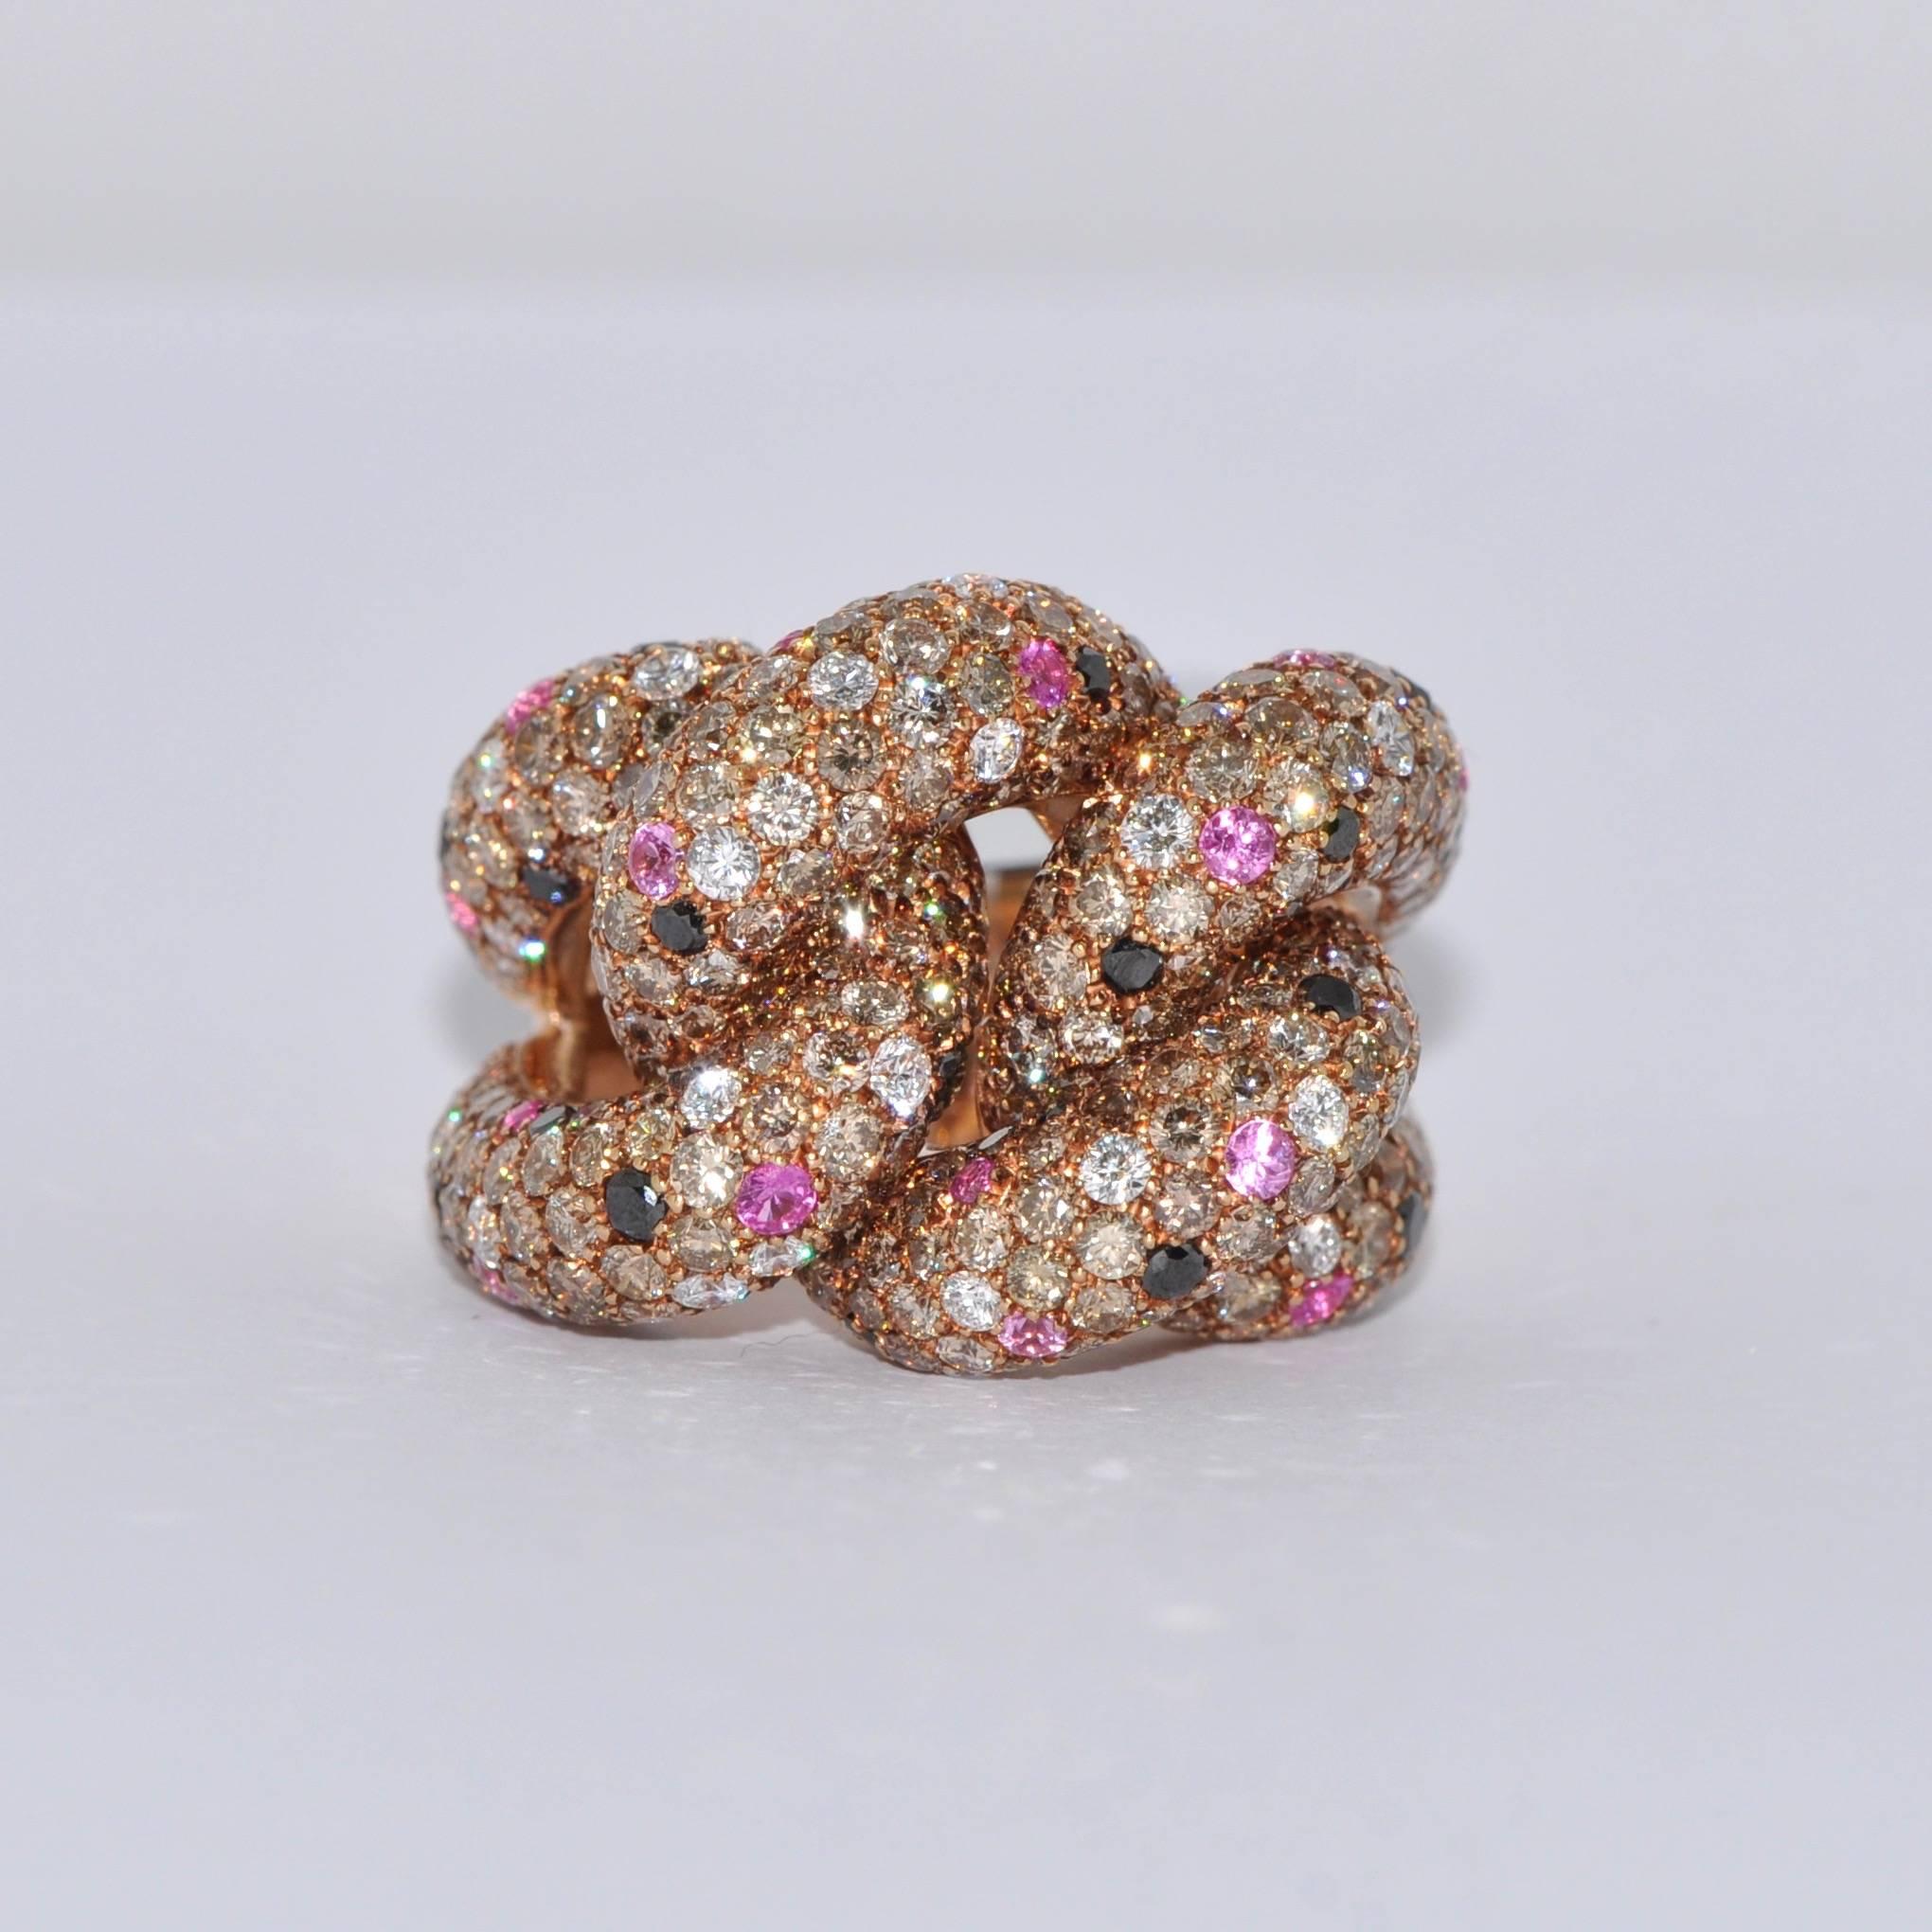 Black and White Diamonds with Pink Sapphires Yellow Gold Interlaced Ring.
Black Diamonds  0.52 Carat
White Diamonds 0.70 Carat
Brown Diamonds 6.30 Carat
Pink Sapphires 0.62 Carat
Yellow Gold 18 Carat
French Size 53/54
US Size 6 1/4 6 3/4